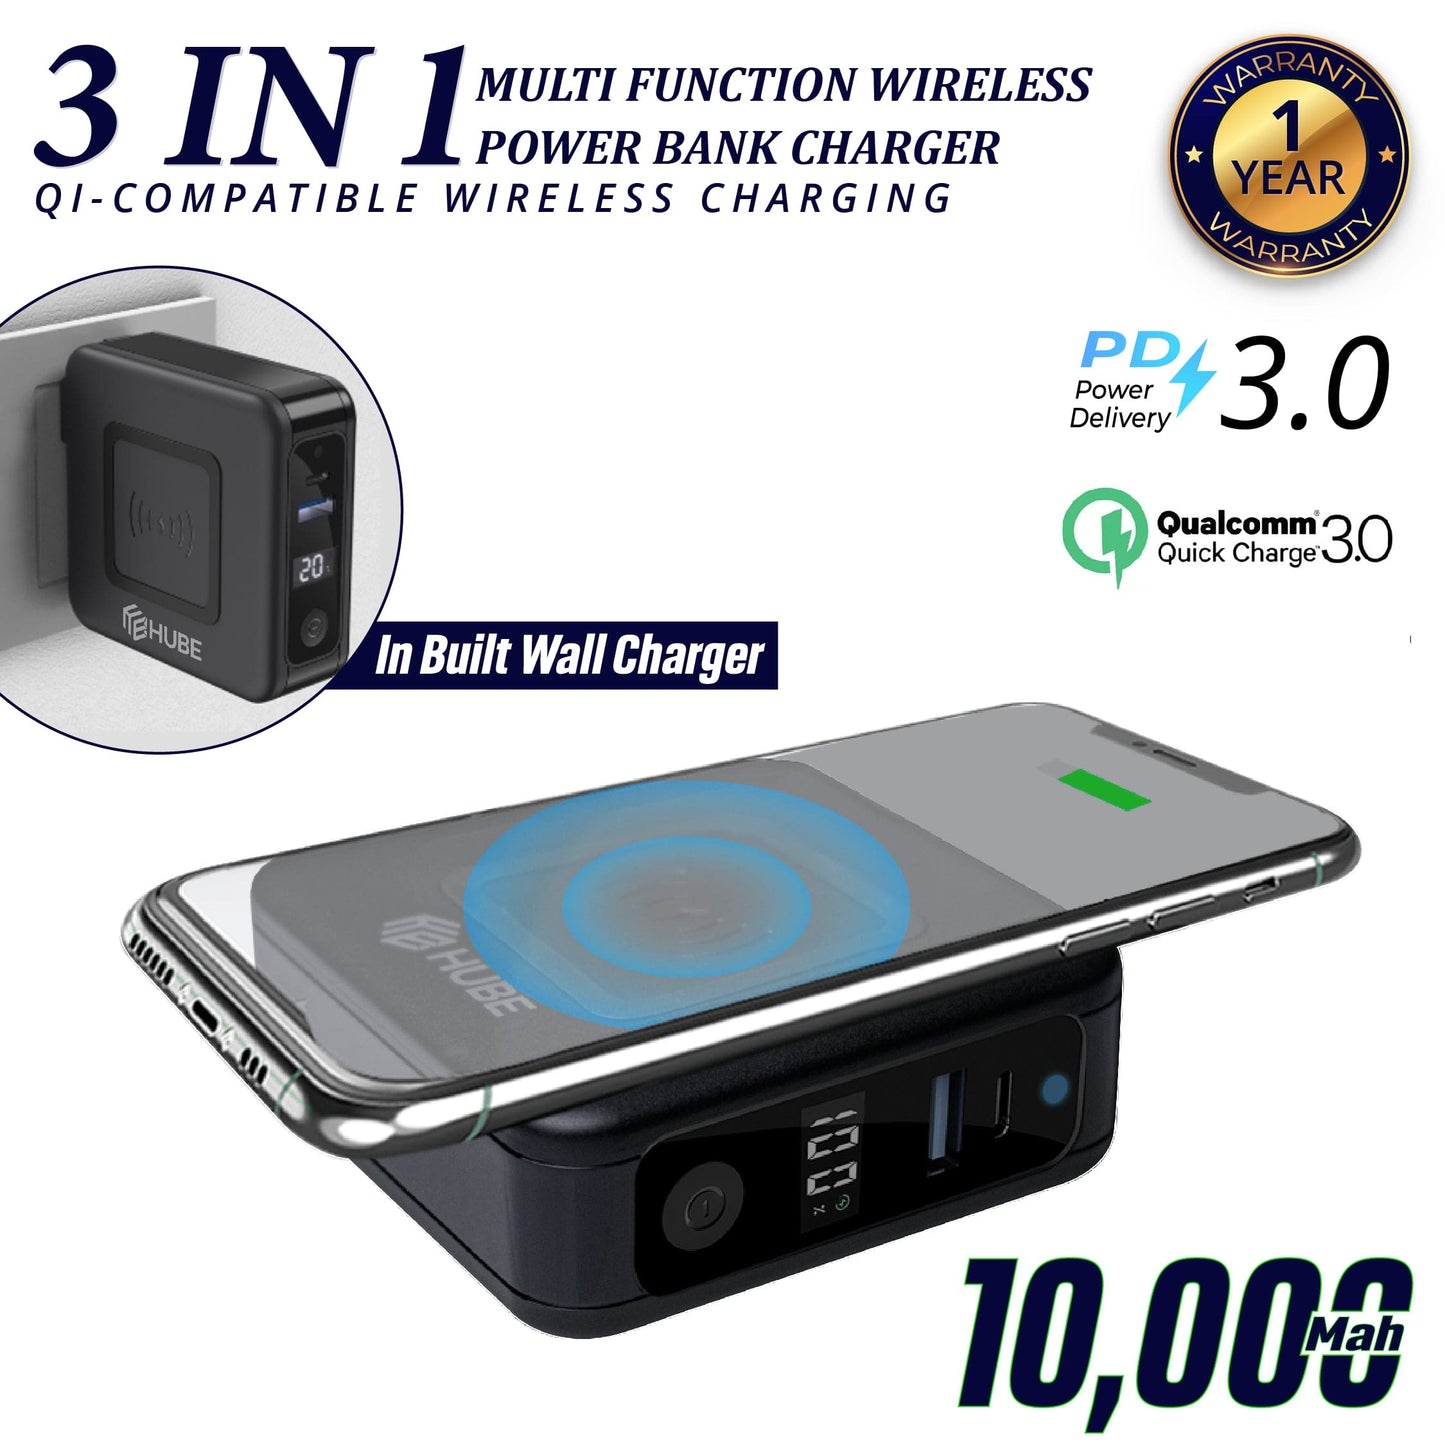 GO HUB 3-in-1 Portable Power Bank with Wall Plug by STATIK